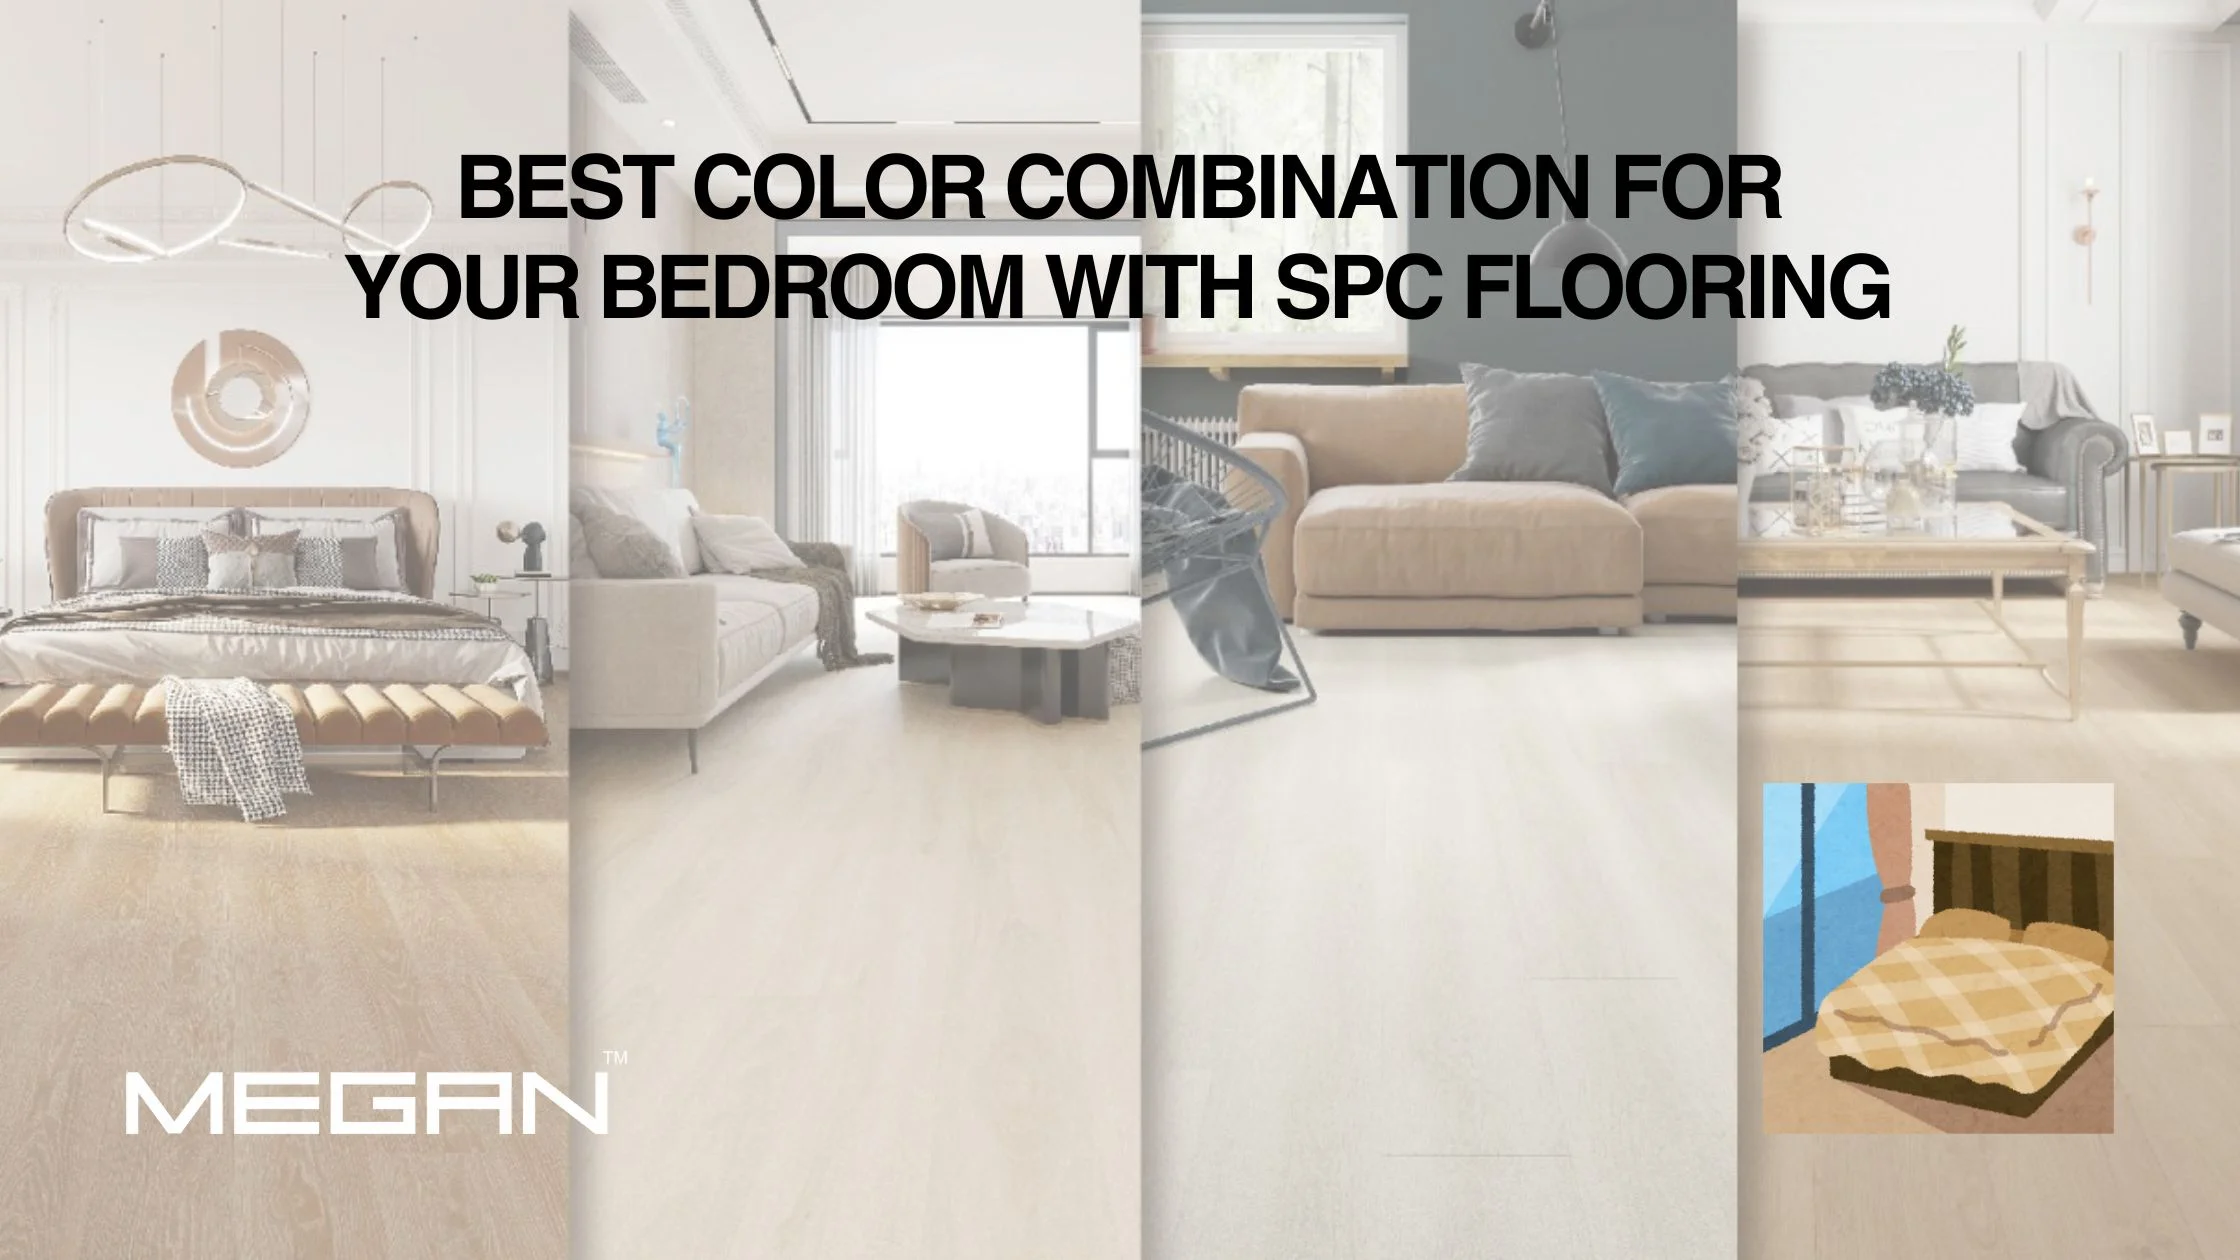 Best Color Combination for your Bedroom with SPC Flooring